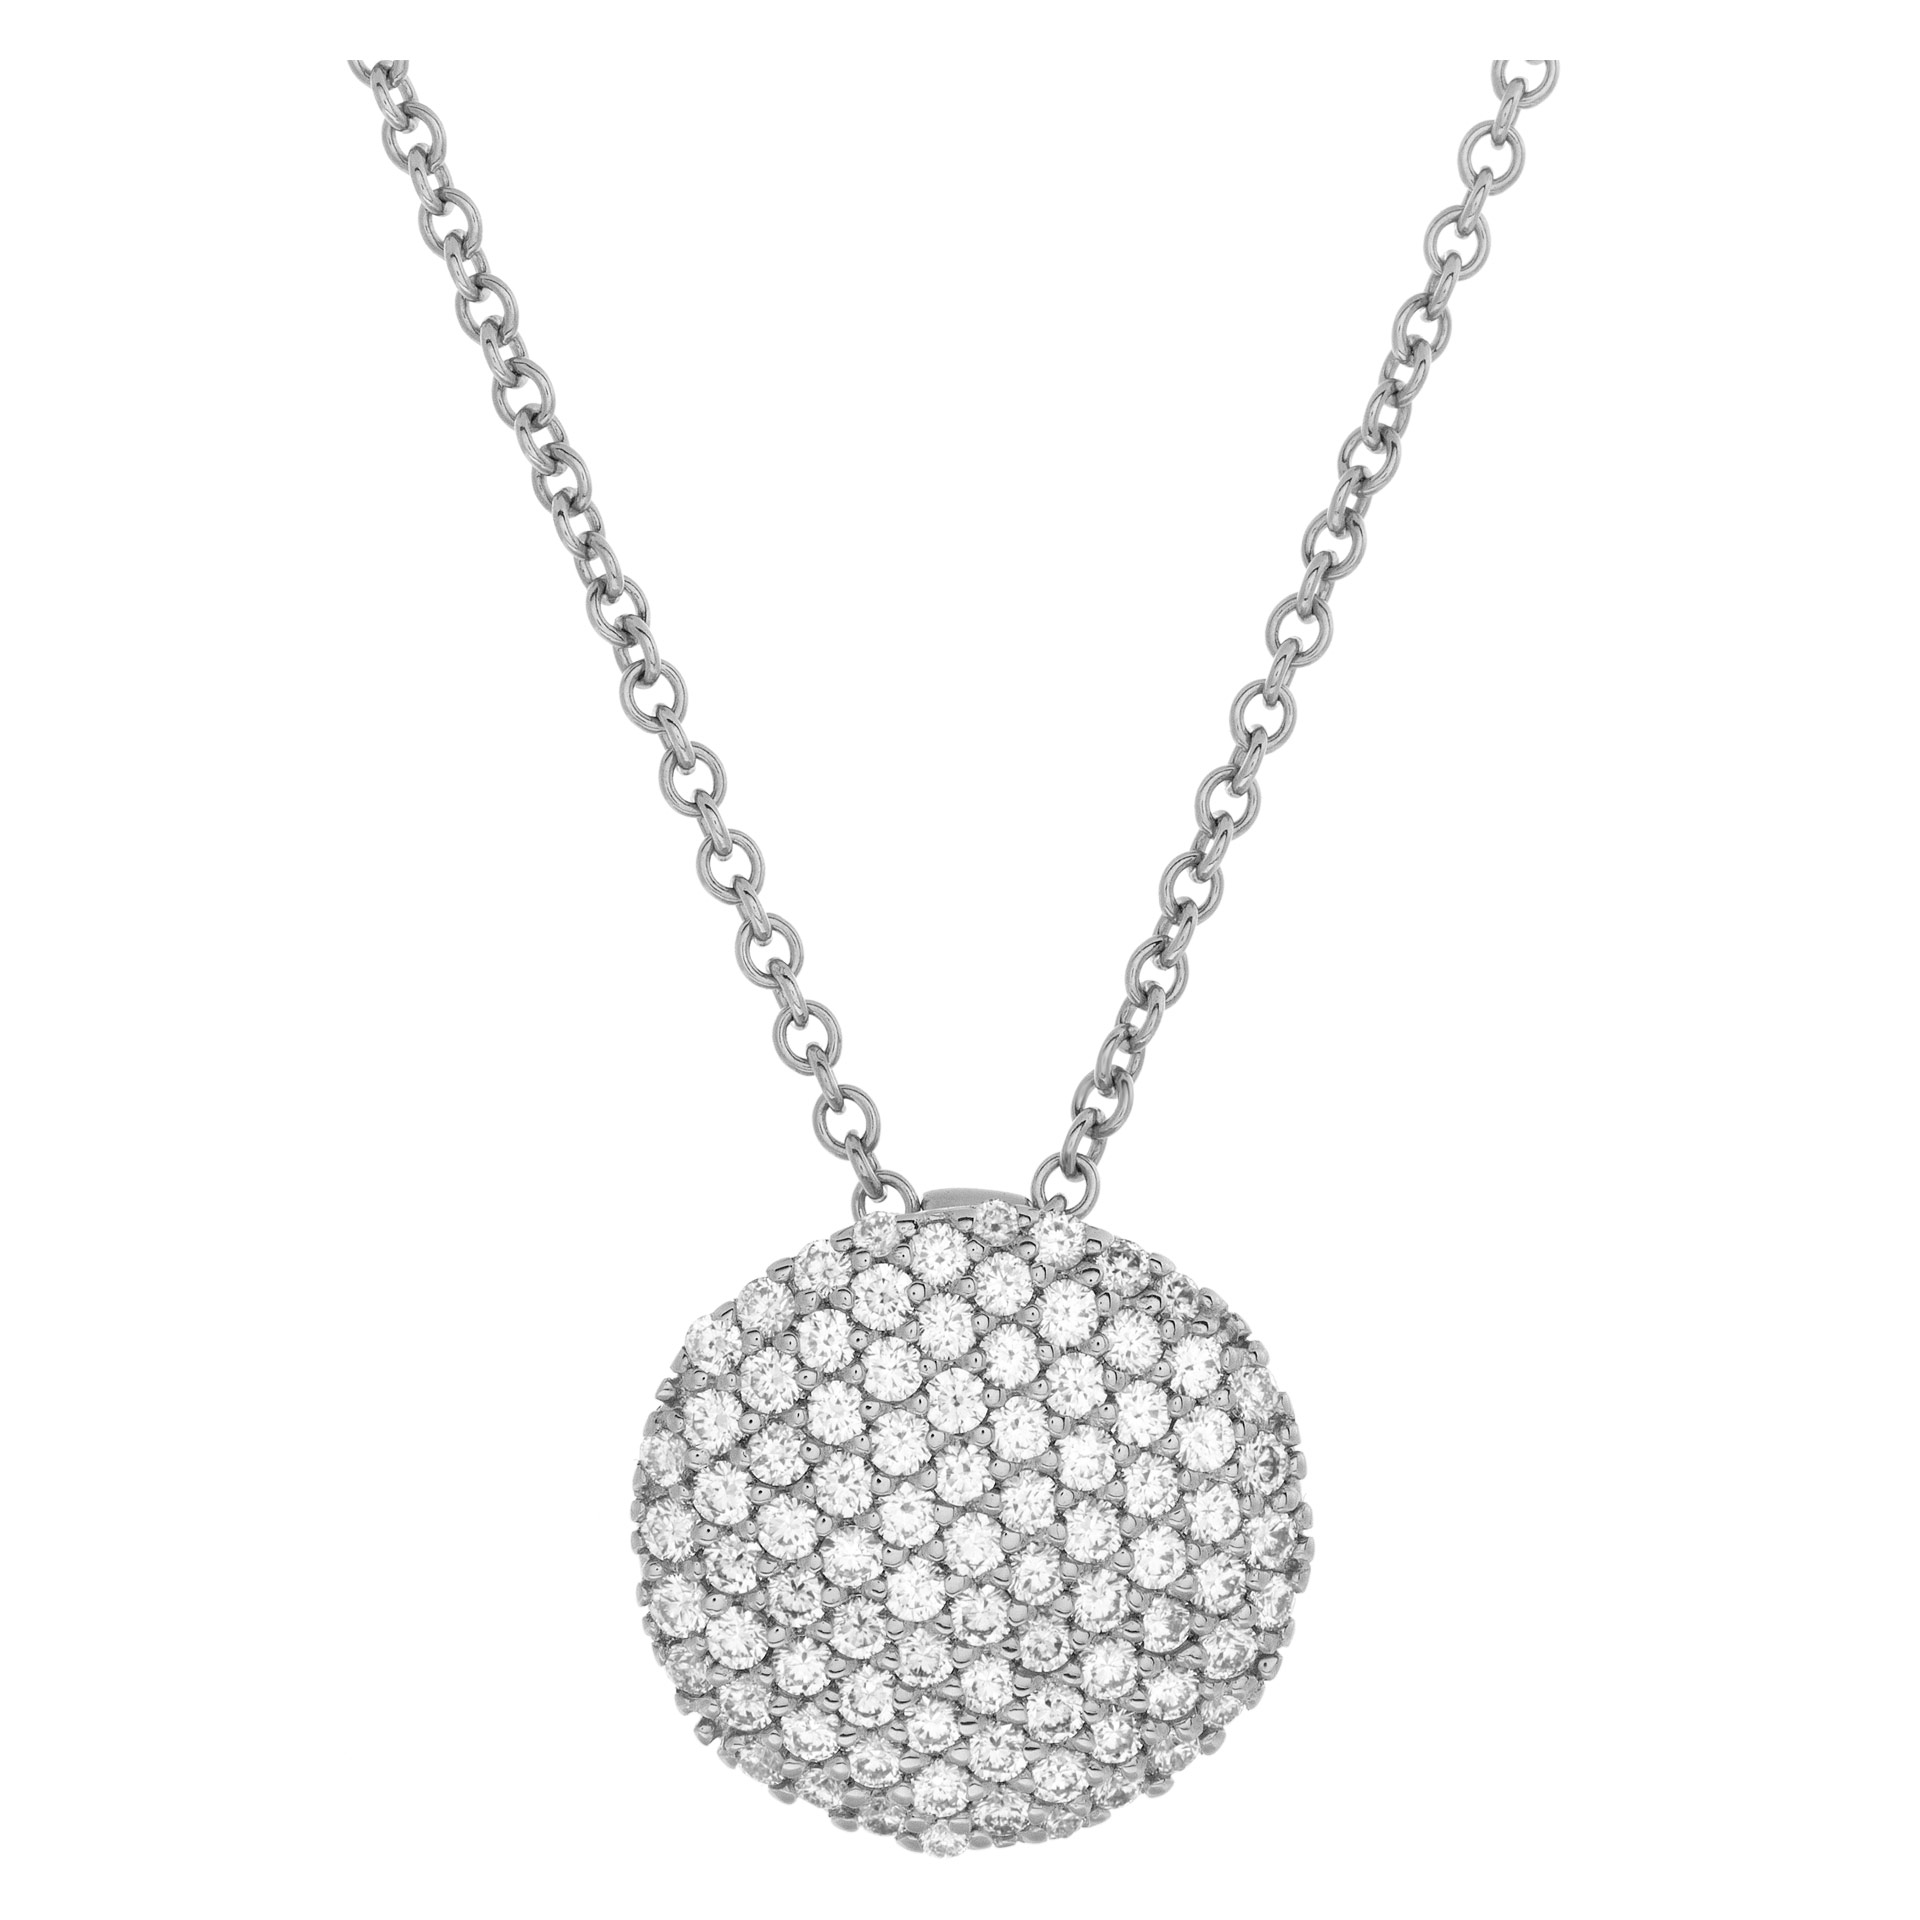 Pave diamond pendant in 18k white gold on 18k white gold chain necklace image 1